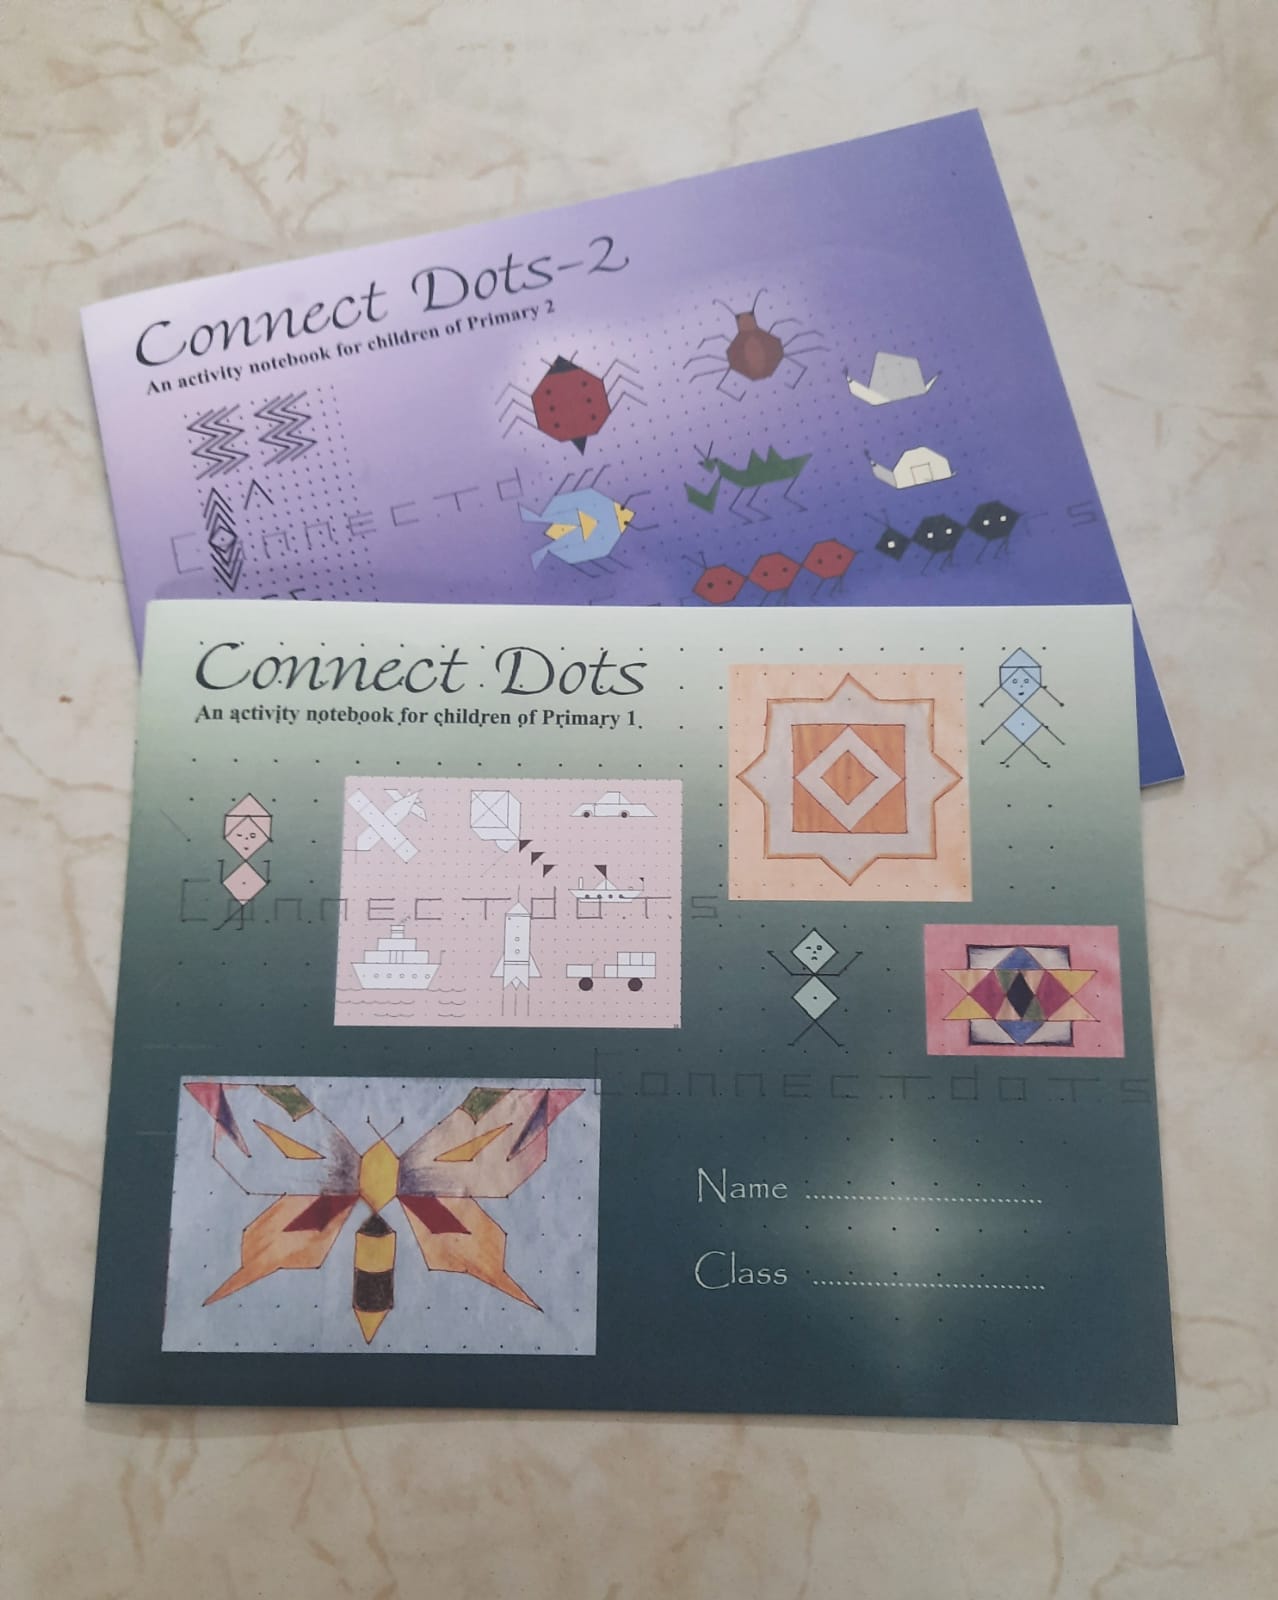 Connect Dots - Children Activity Notebook for Primary 1